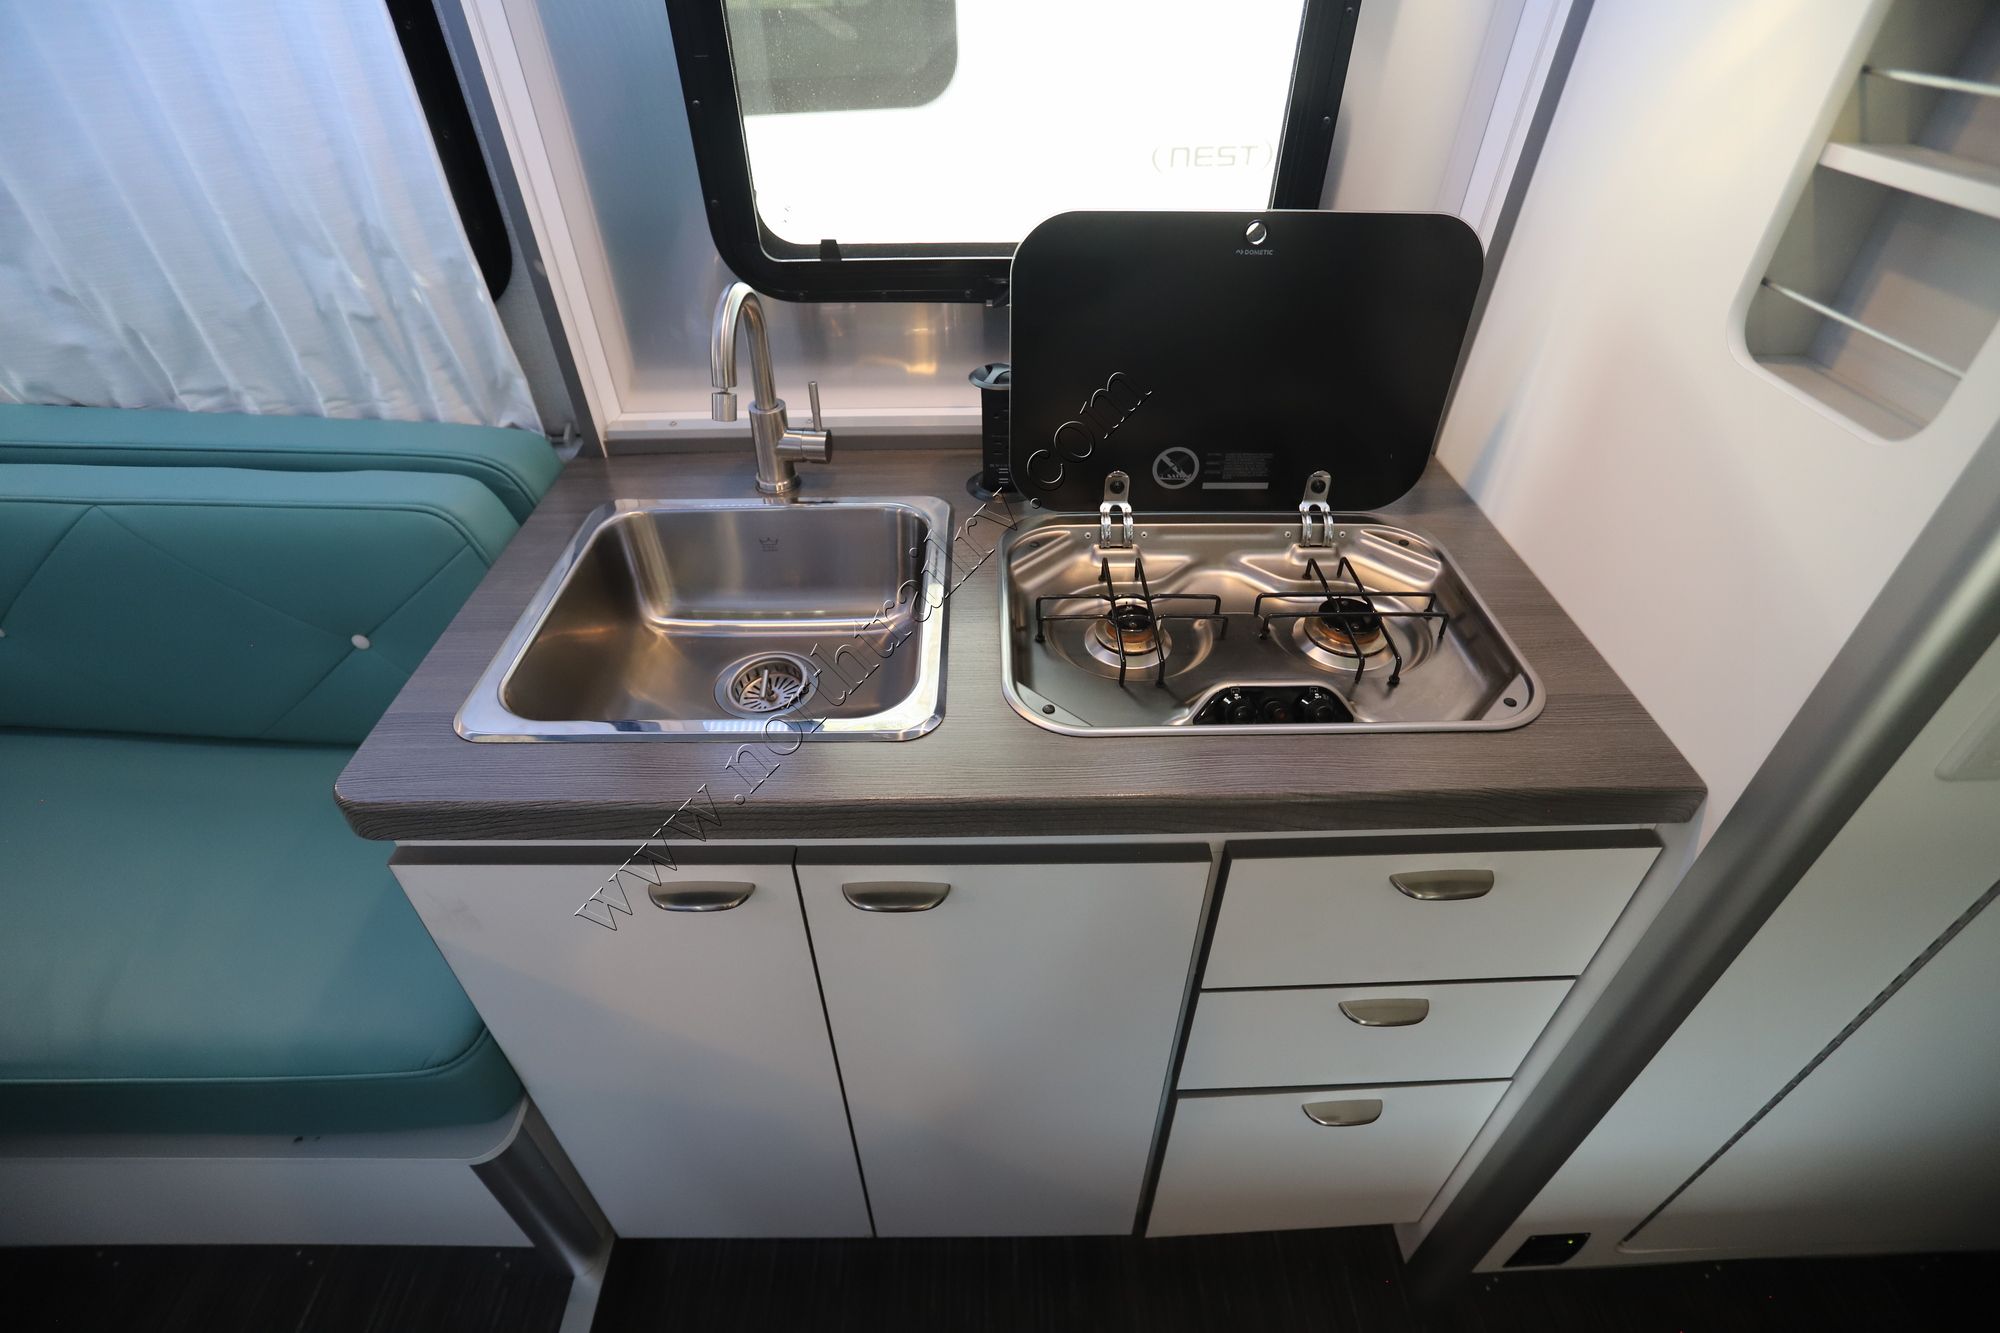 Used 2019 Airstream Nest 16U Travel Trailer  For Sale